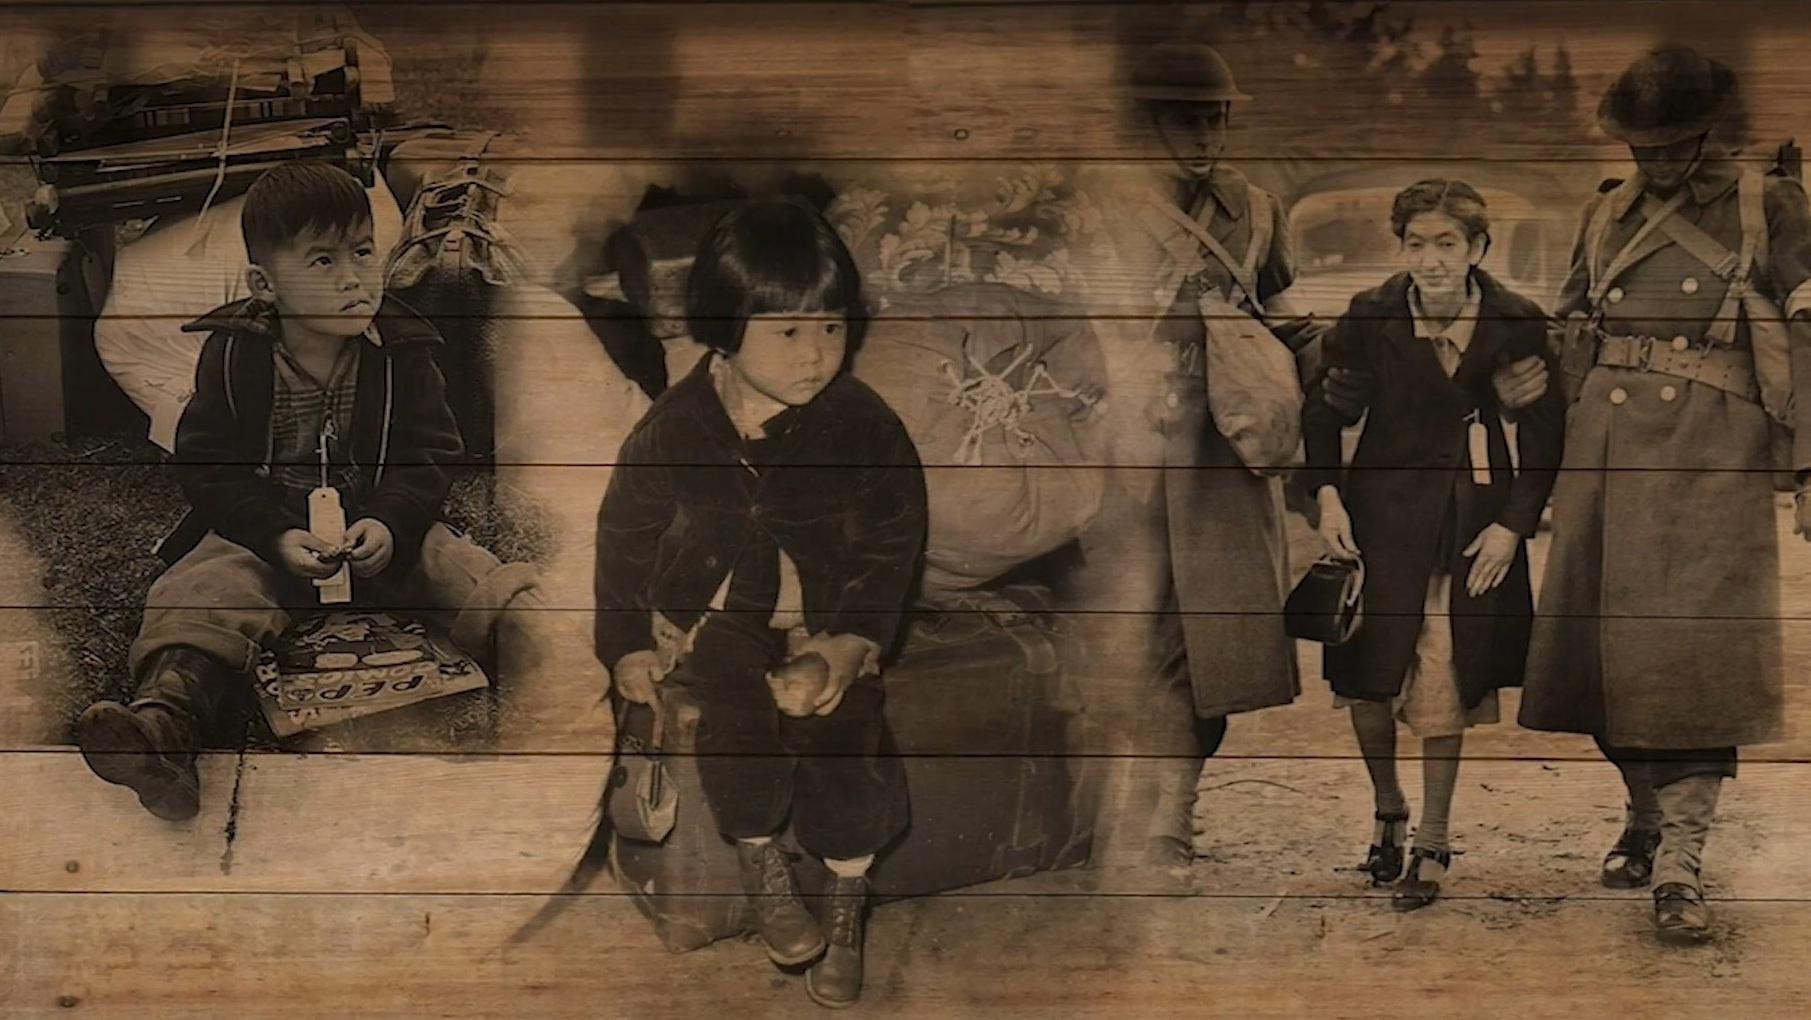 Archival images of a young boy, girl, and woman Japanese-American prisoners from the game. 